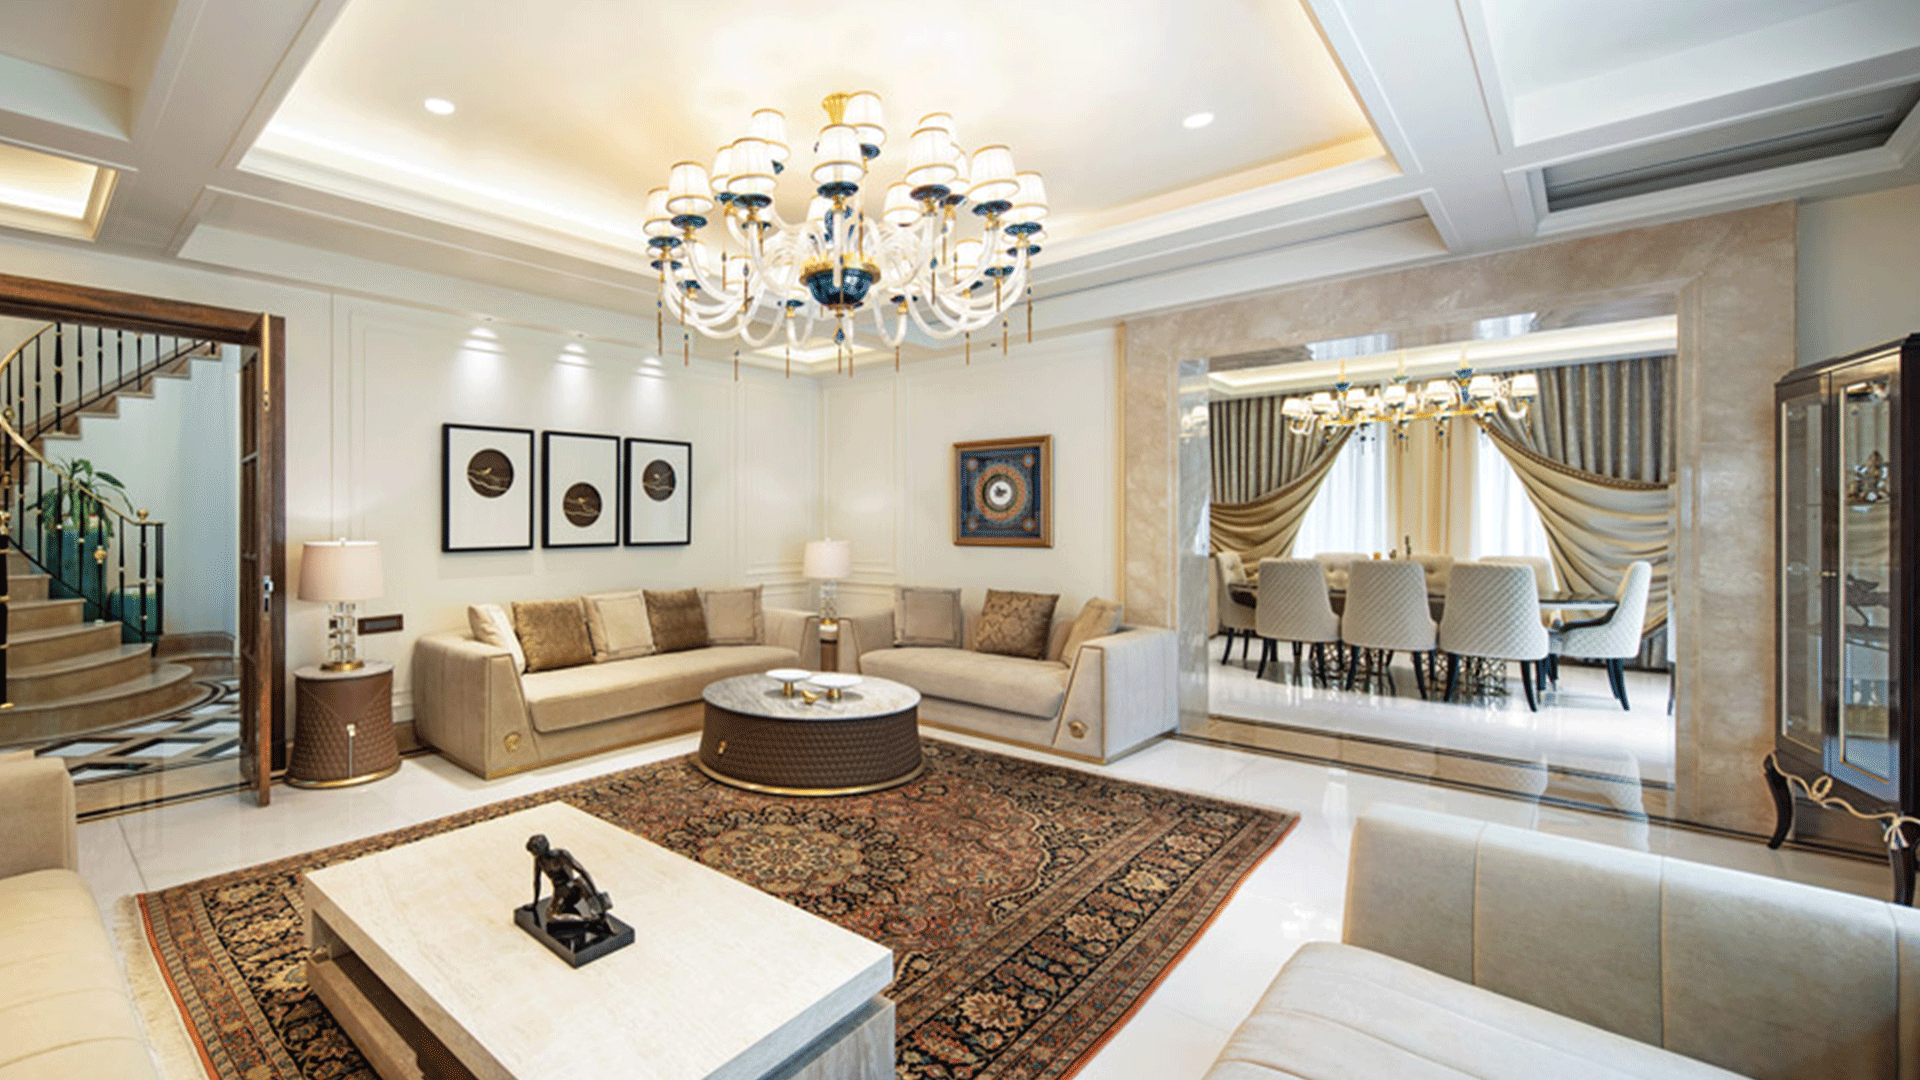 In the lap of luxury - Architect and Interiors India